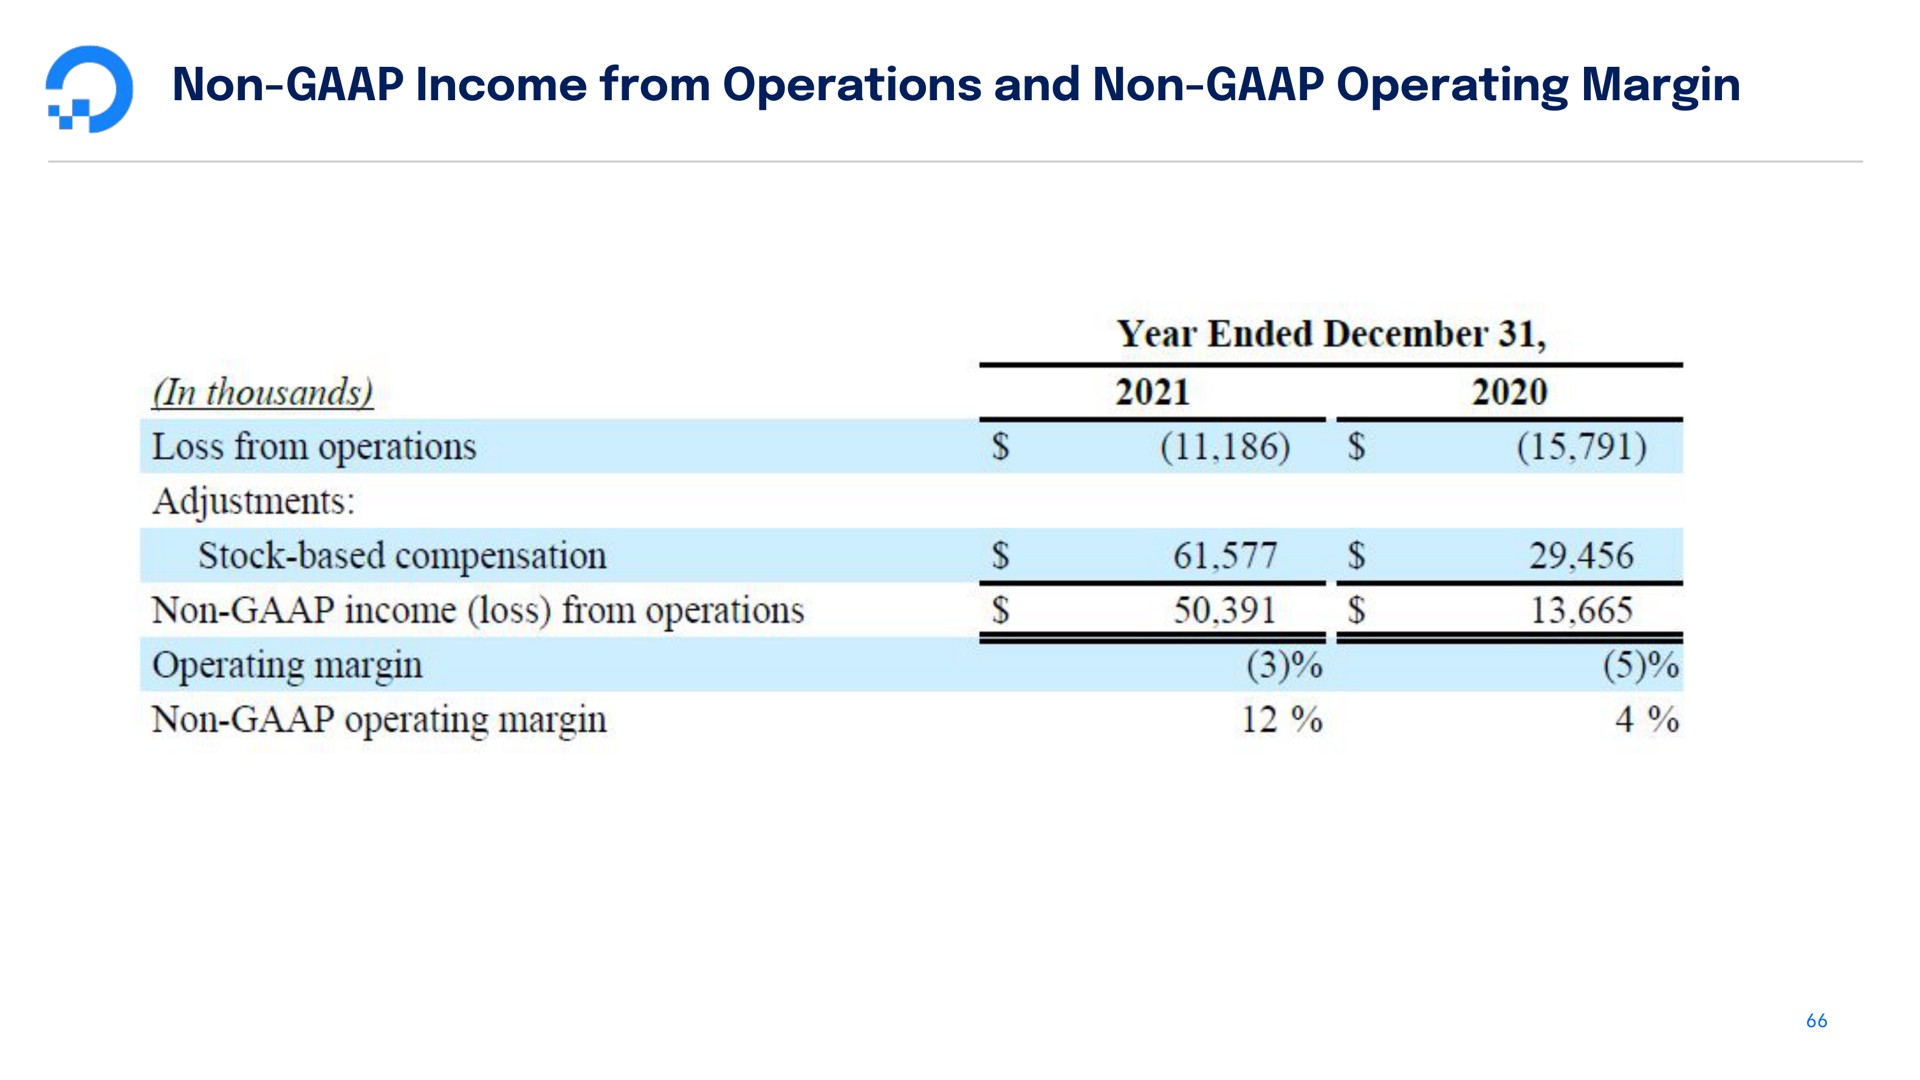 non income from operations and non operating margin in thousands loss from operations adjustments stock based compensation non income loss from operations operating margin non operating margin year ended | DigitalOcean